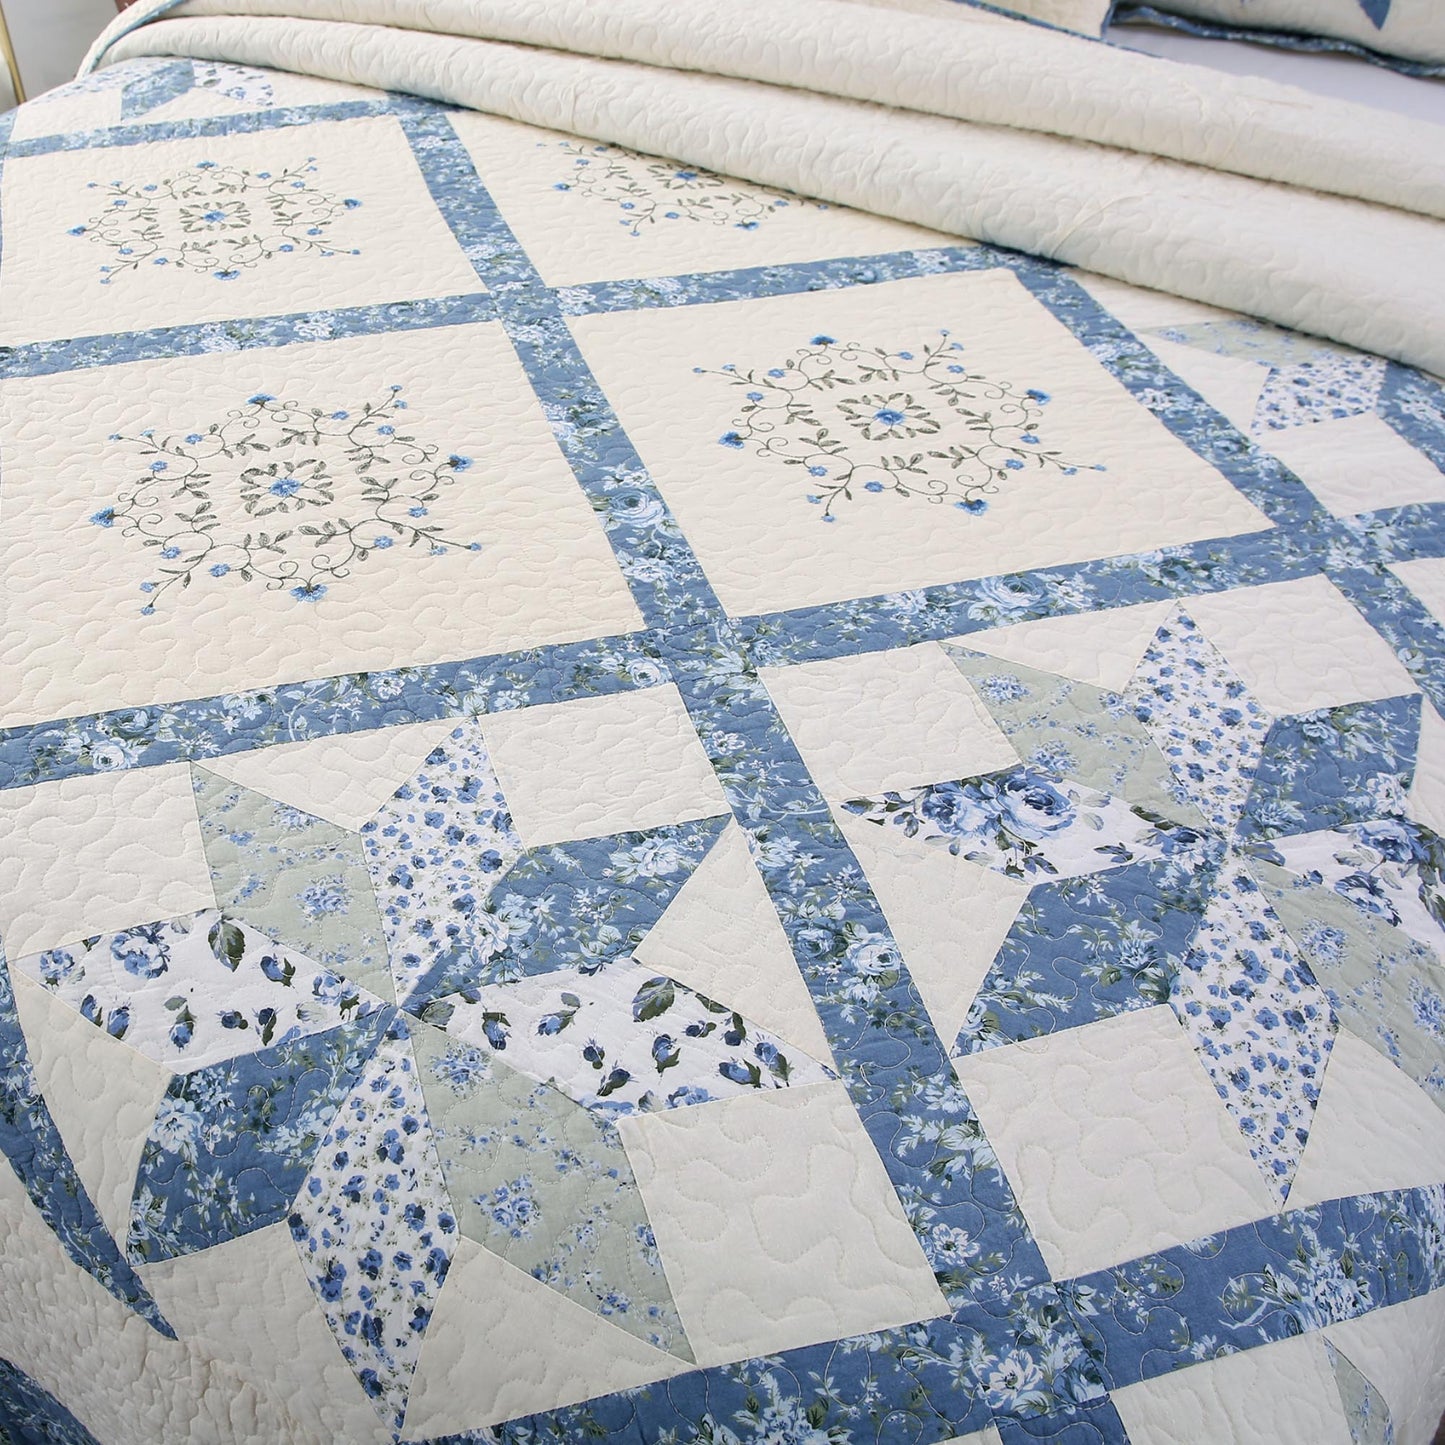 Patchwork Embroidery Bedspread